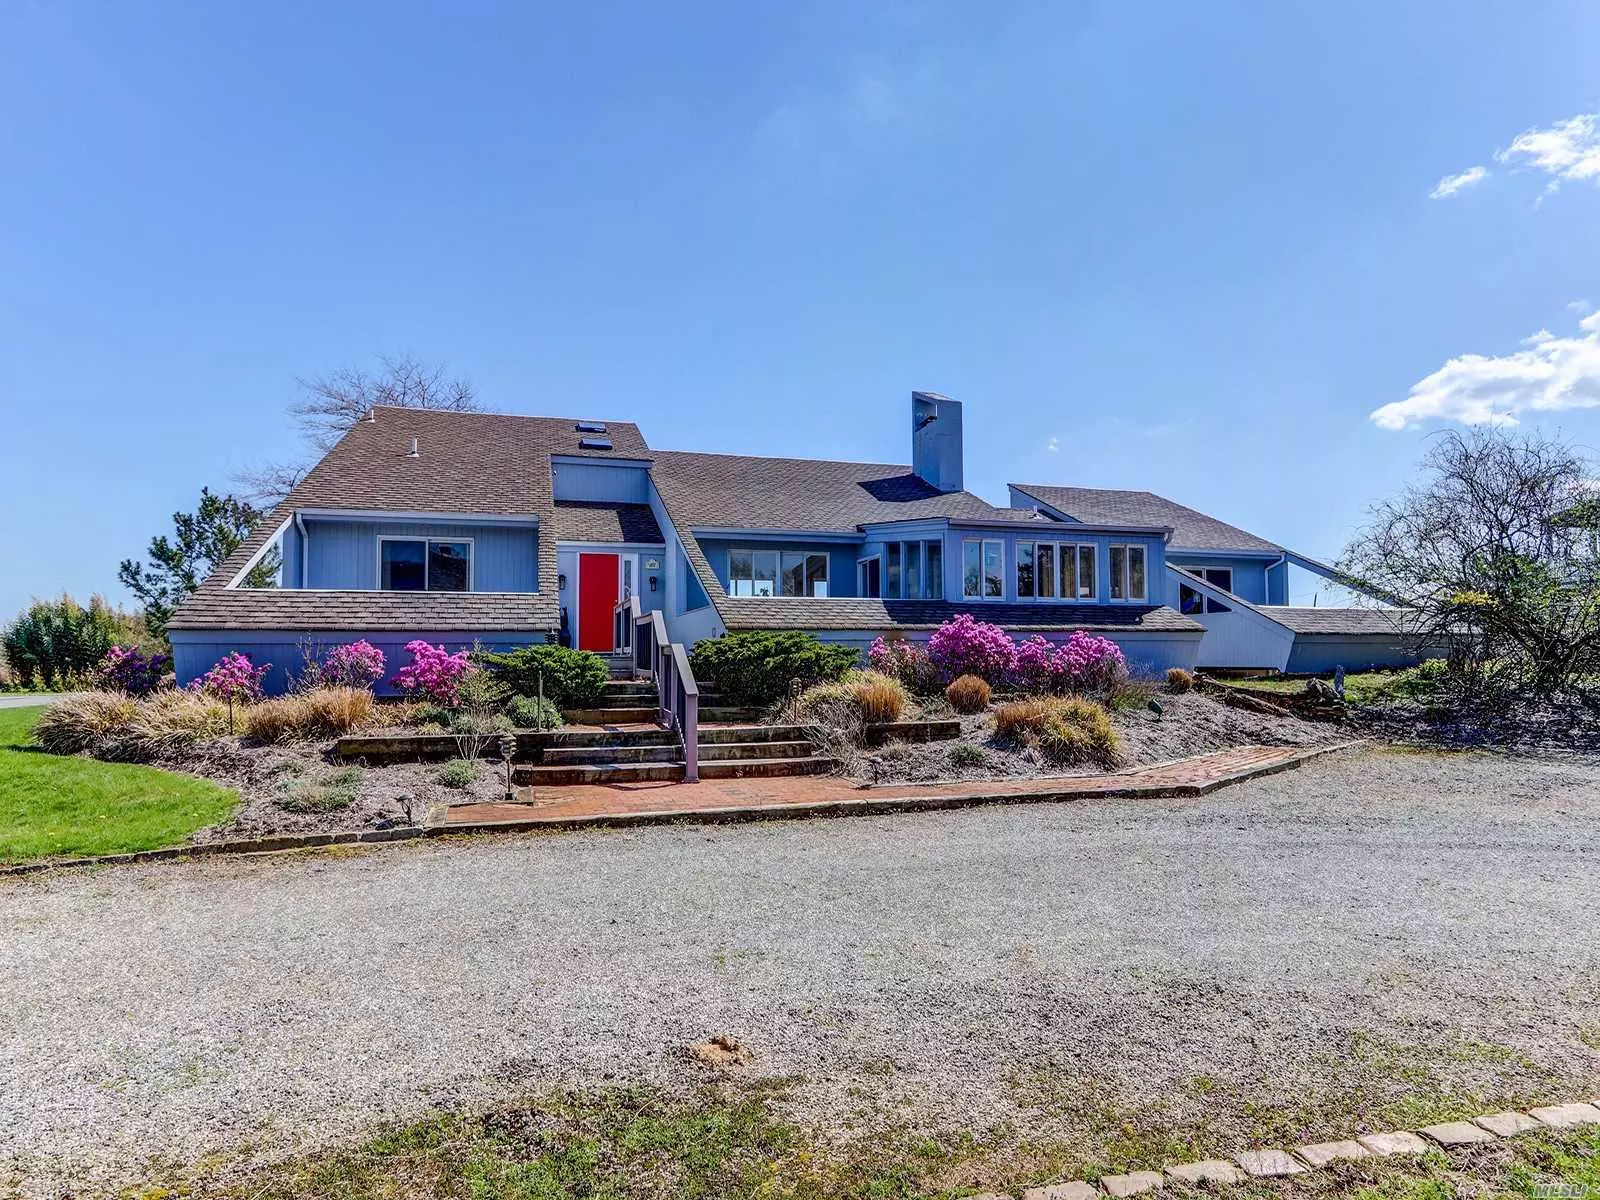 Enjoy beautiful views overlooking the bay from this serene location in the heart of Remsenburg!!! Complete with a gunite pool and a new tennis court being installed June 15, 2020. This 4 bedroom 4 bathroom home sits on .82 acres on one of the most beautiful streets in Remsenburg. Bring your Kayaks and jet skies for easy access into canal from backyard!!